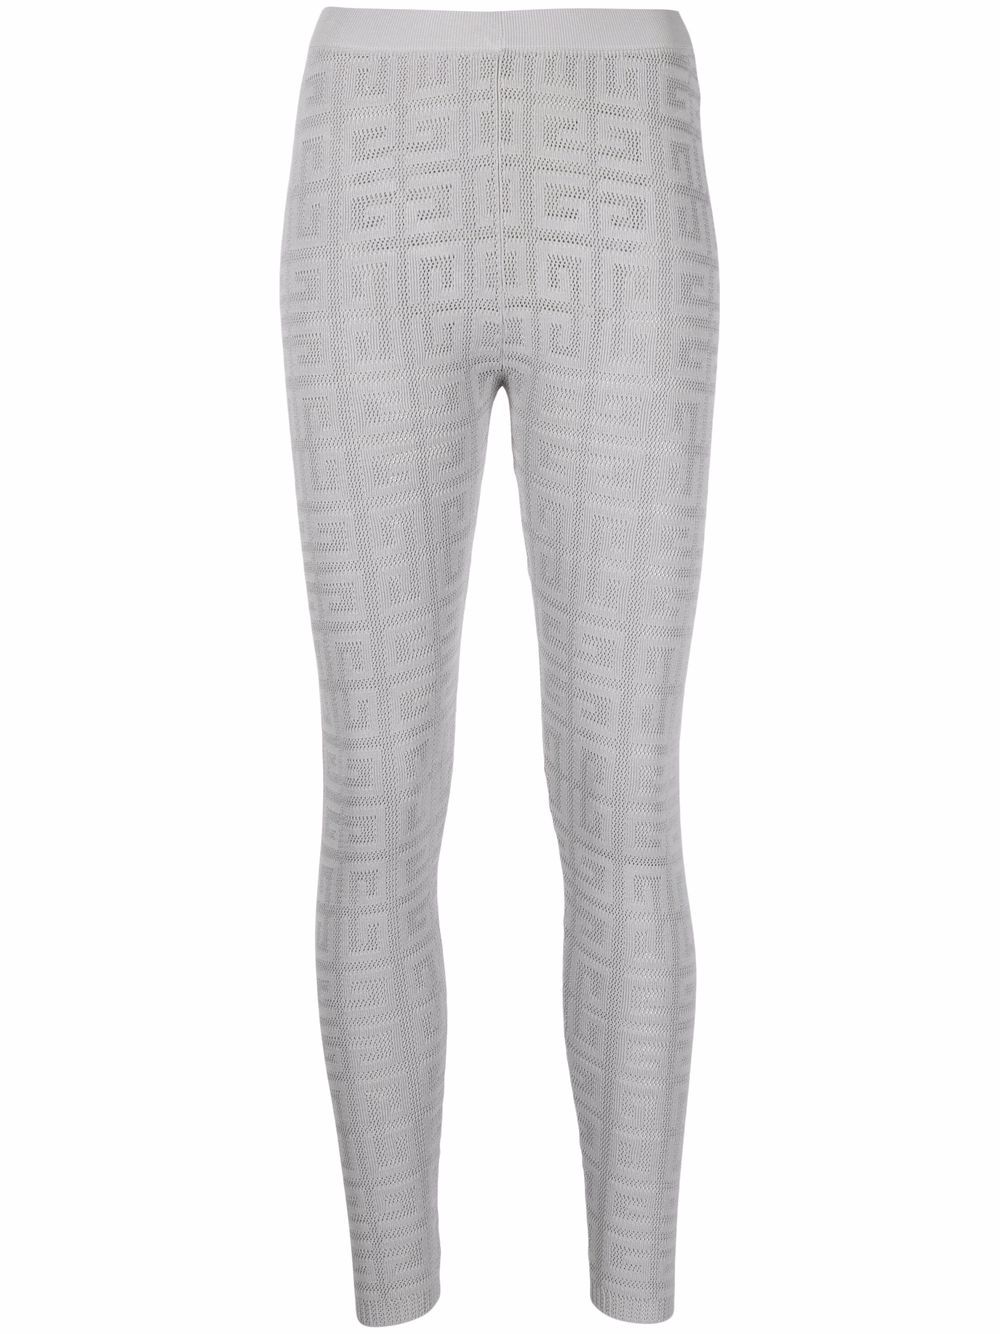 Givenchy monogram-pattern high-waisted leggings - Grey von Givenchy